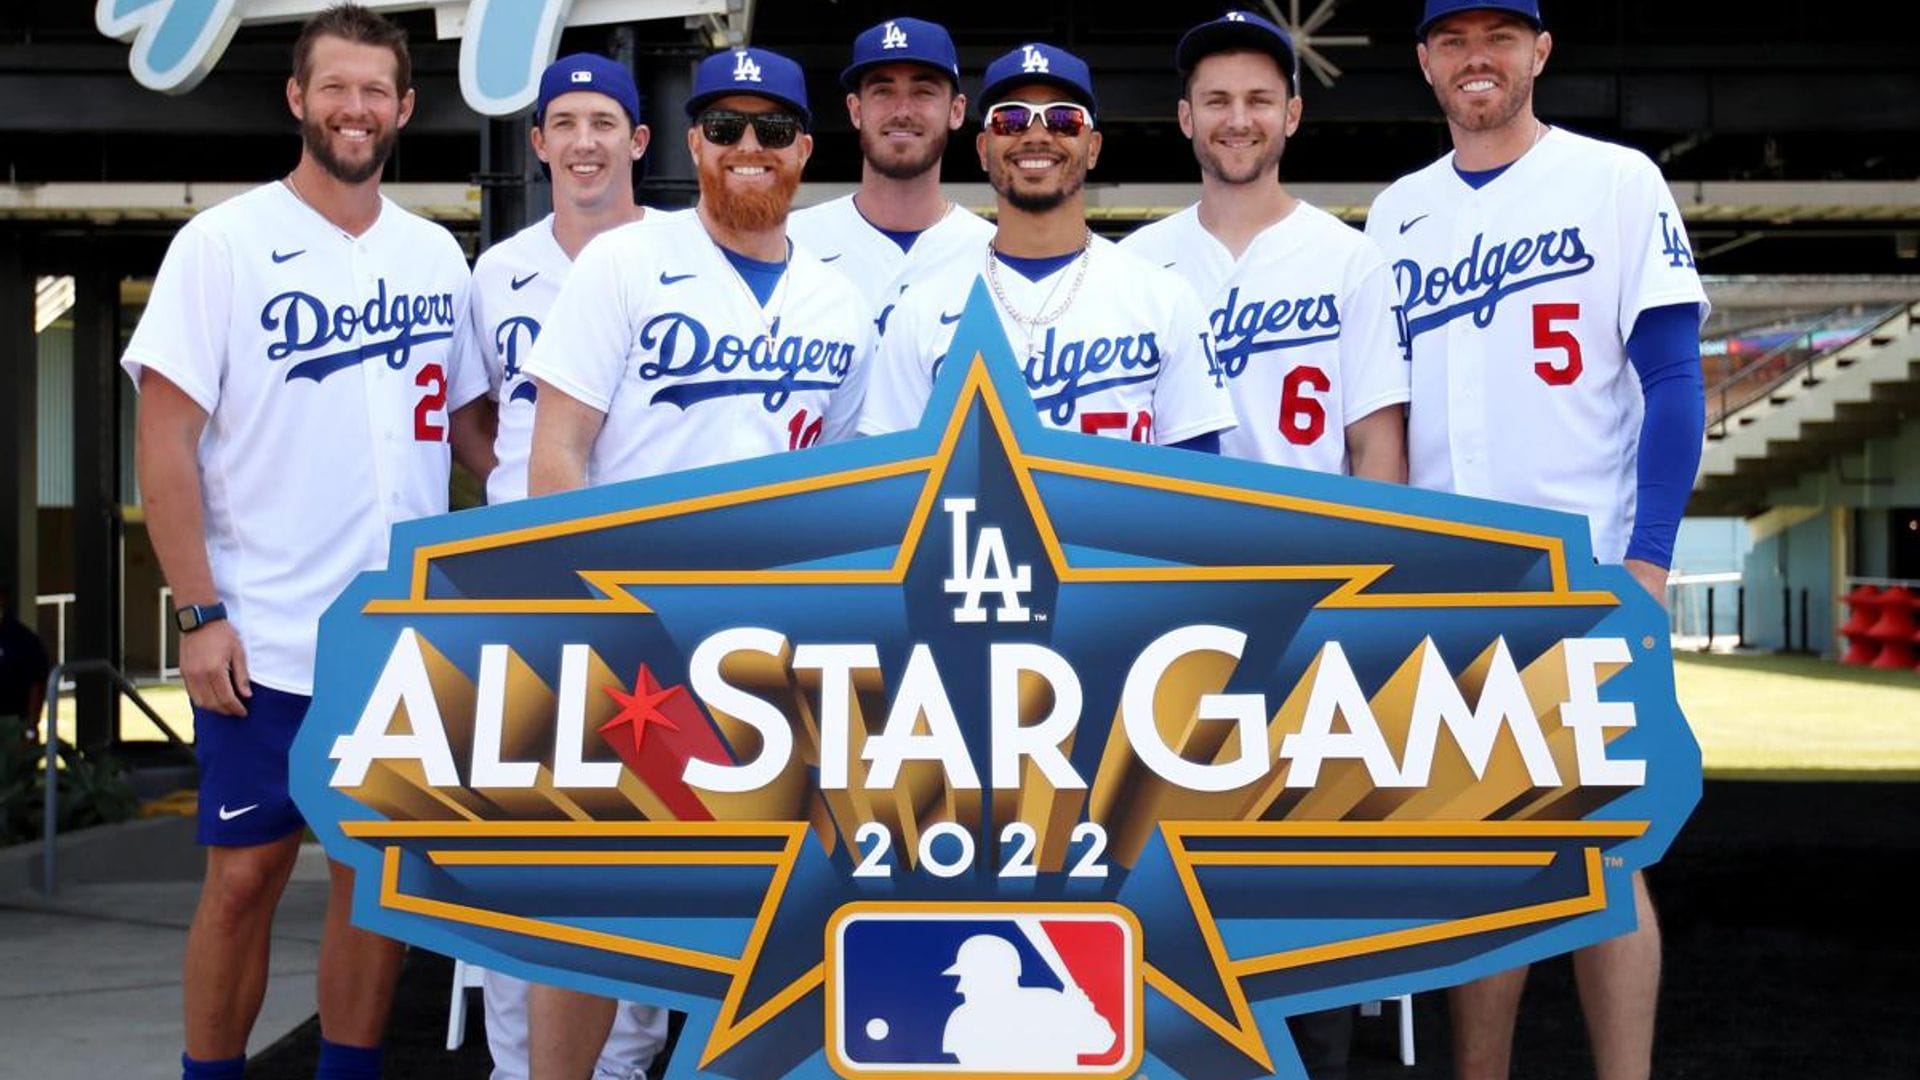 MLB and the Los Angeles Dodgers have started the official countdown to All-Star week